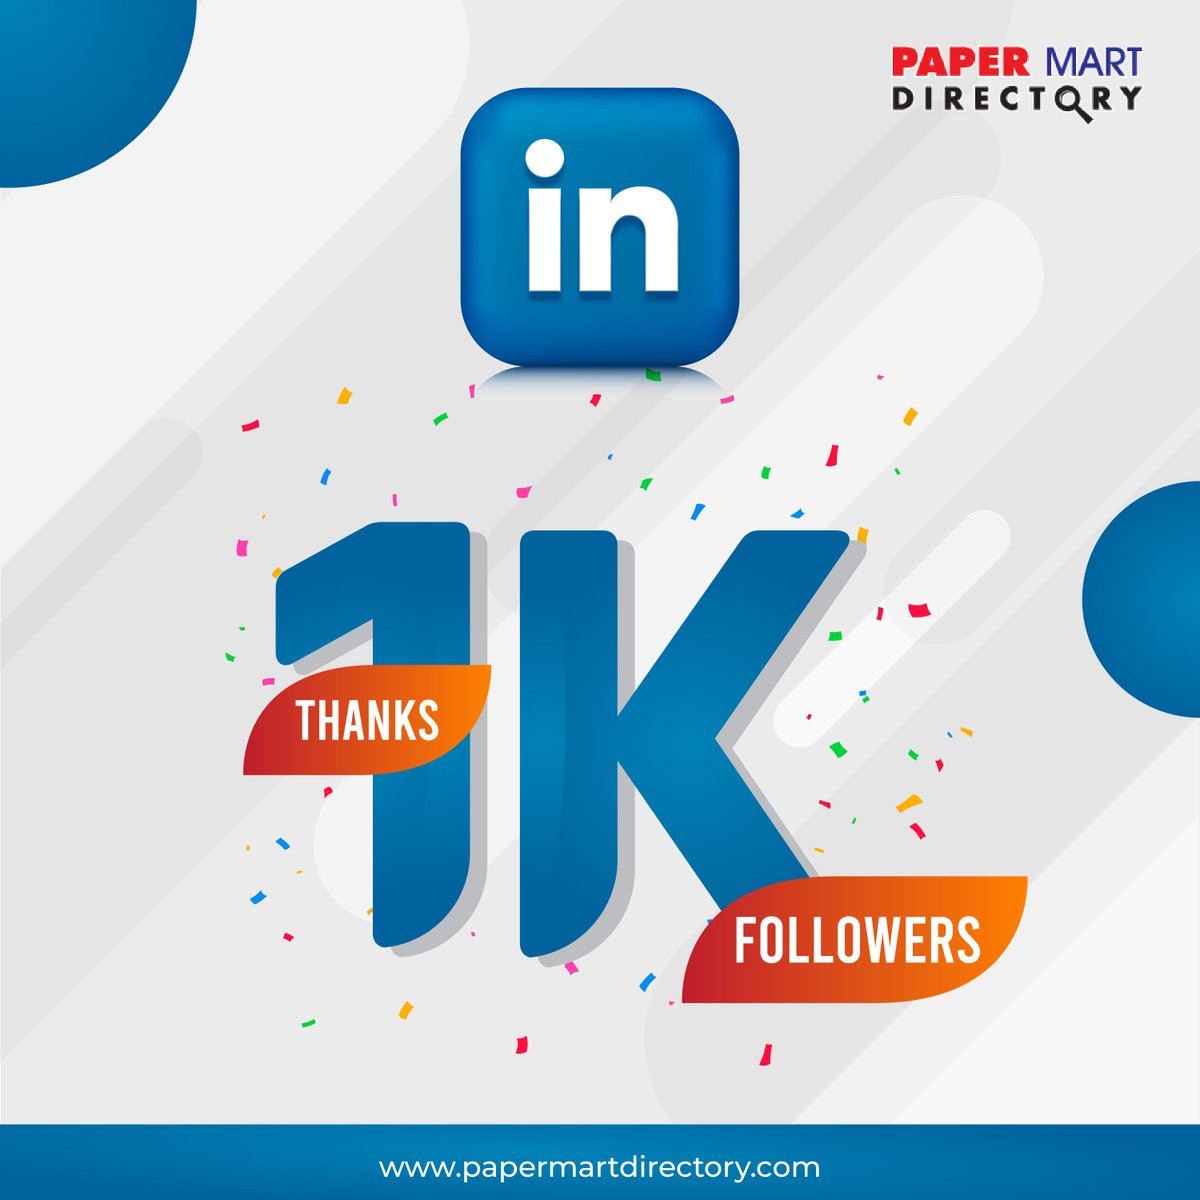 We are excited to share that @PMDirectory1 recently hit the 1000+ follower mark on our #LinkedInPage.

Not a ‘follower’ yet? Join us Now on LinkedIn: linkedin.com/company/paperm…

#PaperMartDirectory #Followers #LinkedinFollowers #PaperIndustry #PaperDirectory #PaperMart #Directory